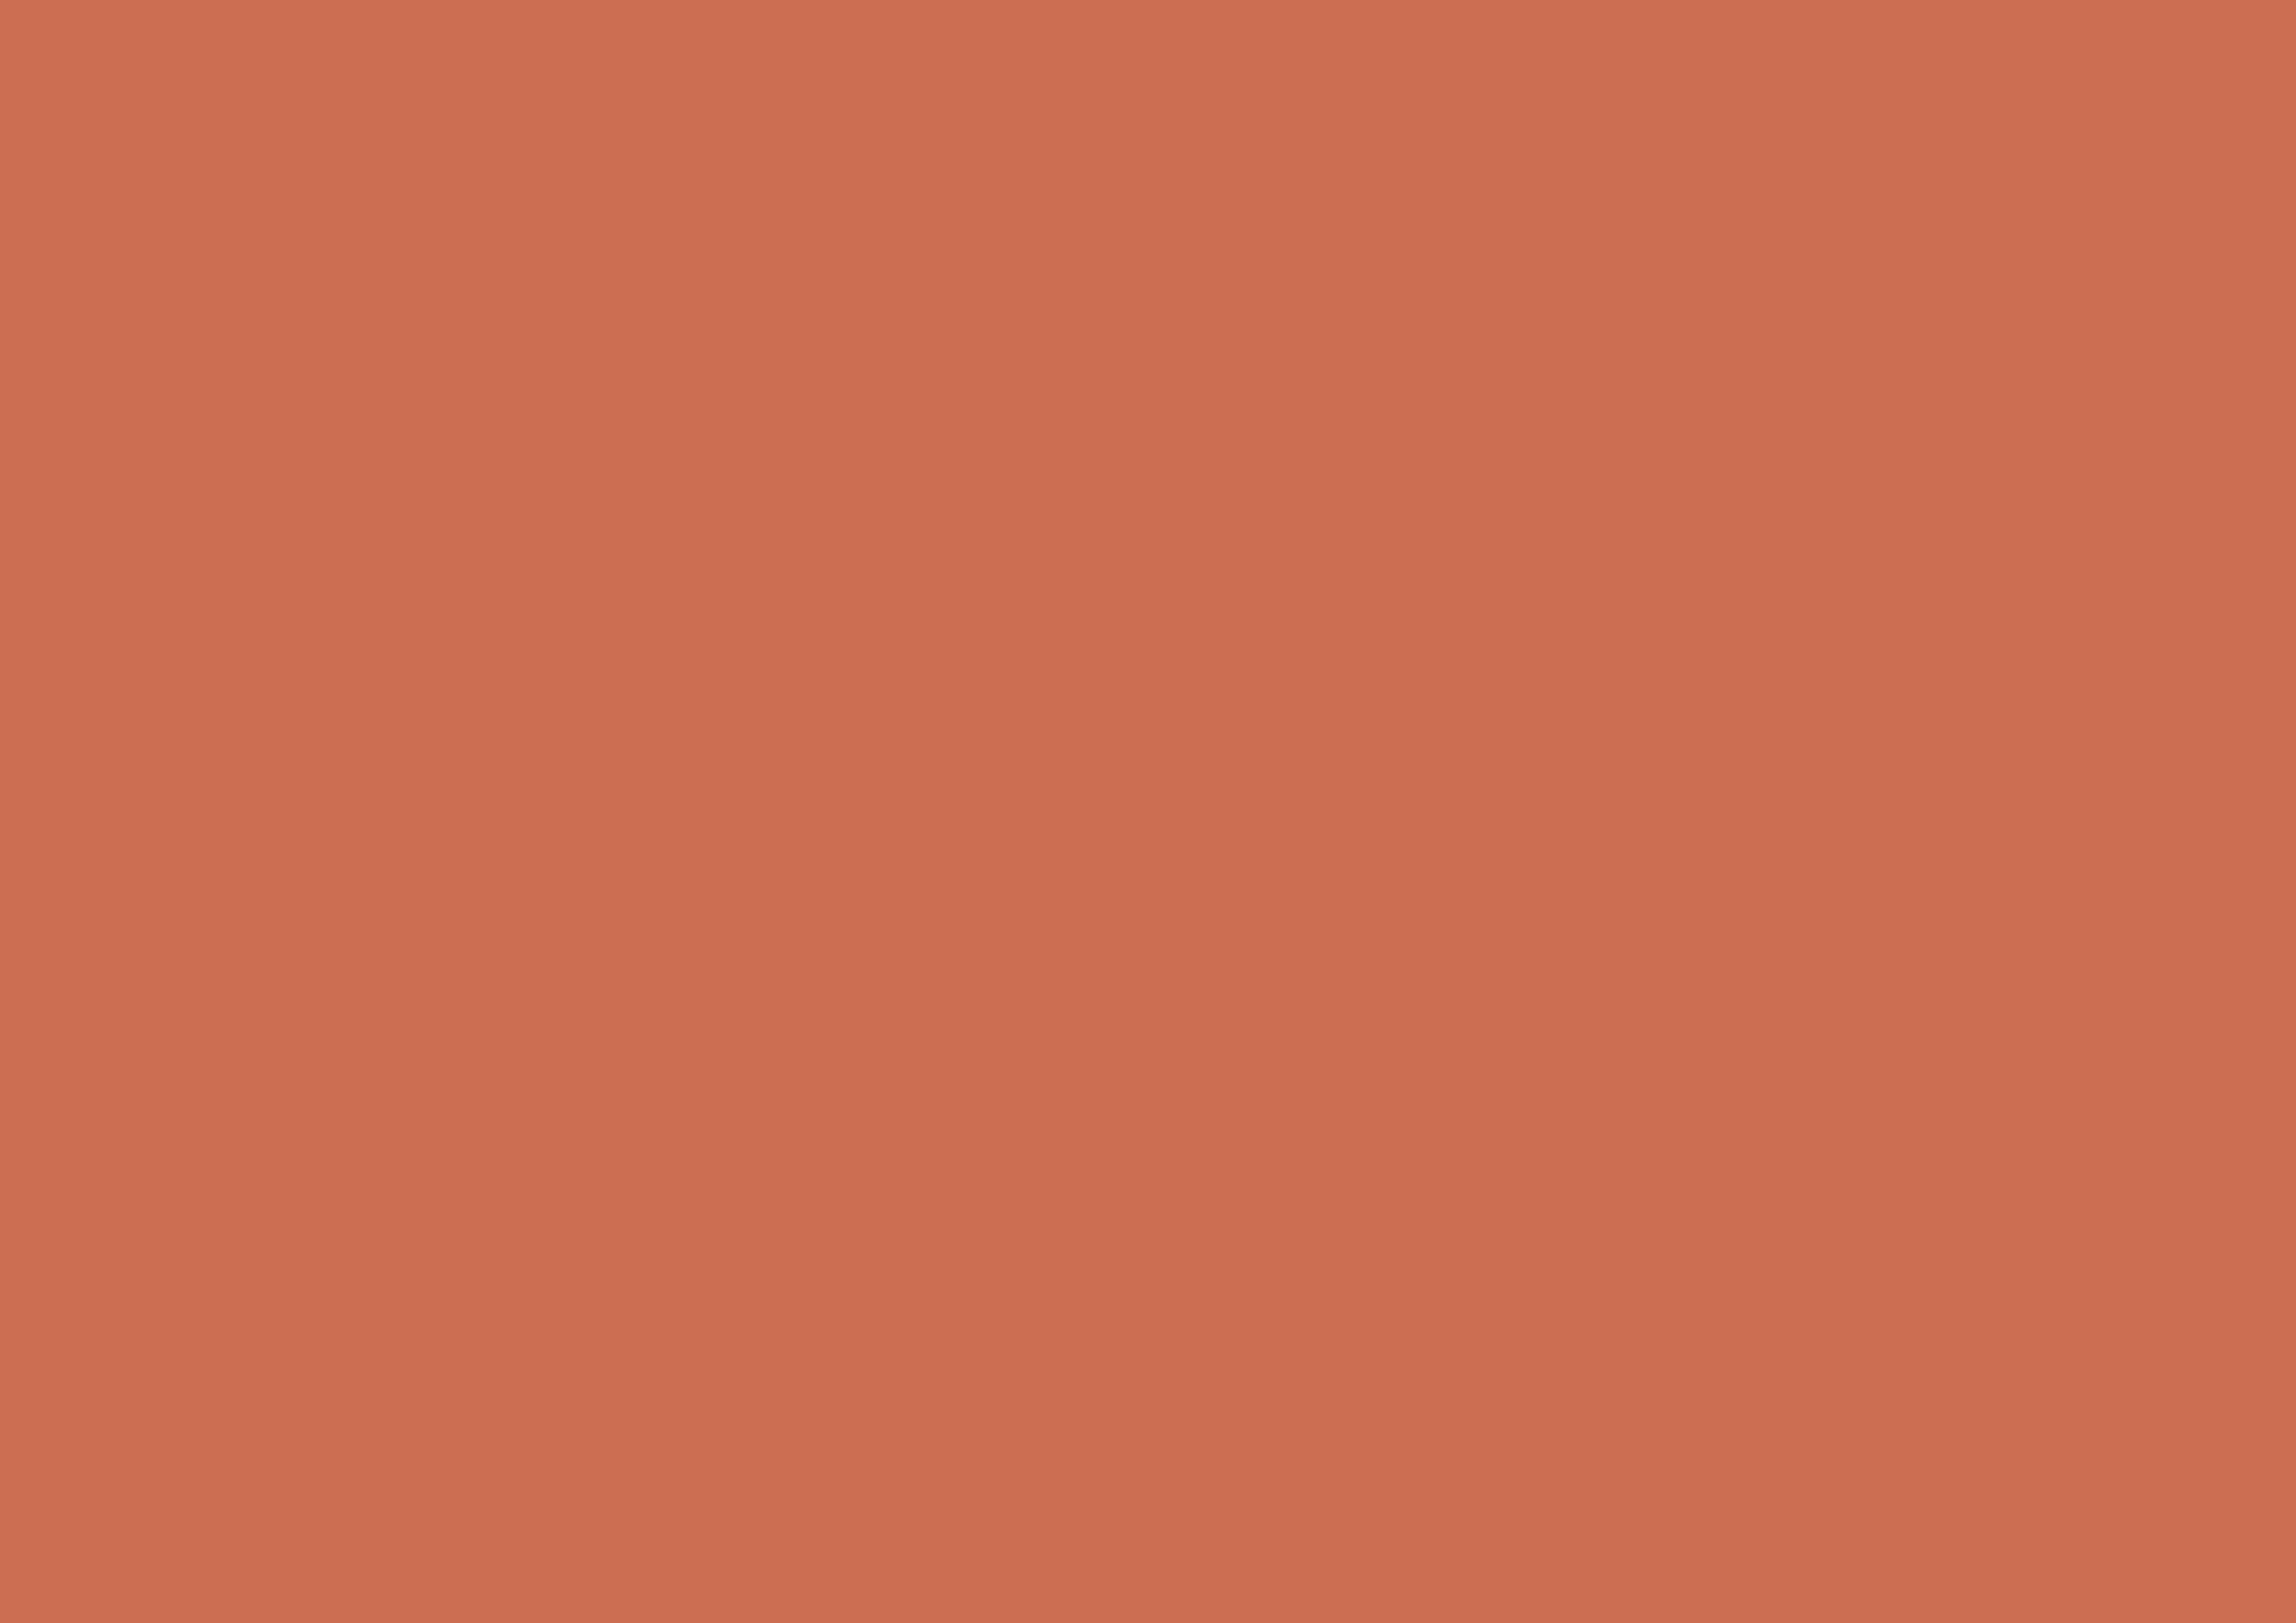 3508x2480 Copper Red Solid Color Background